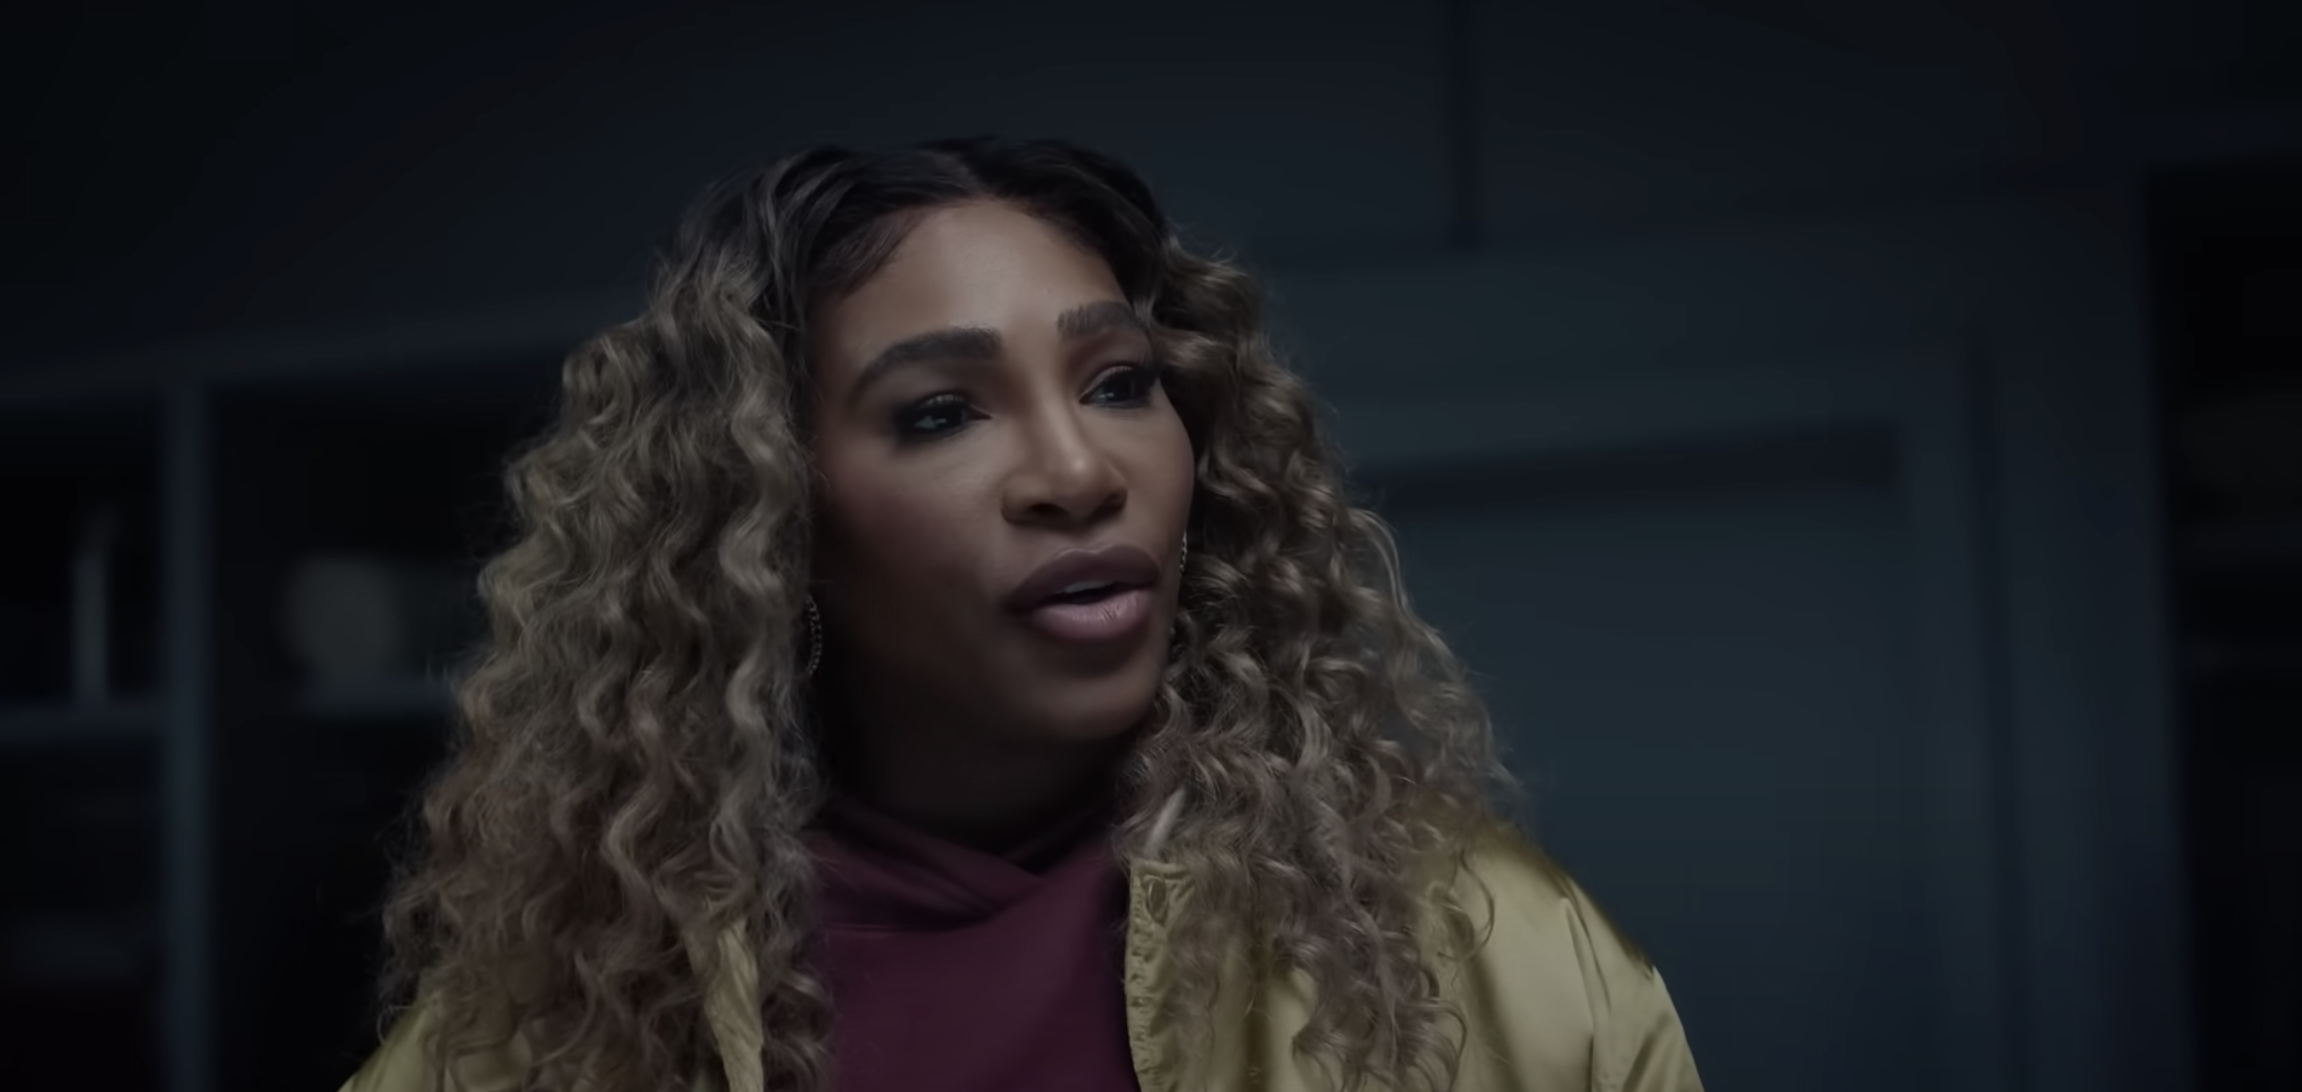 Remy Martin, “Inch by Inch featuring Serena Williams”